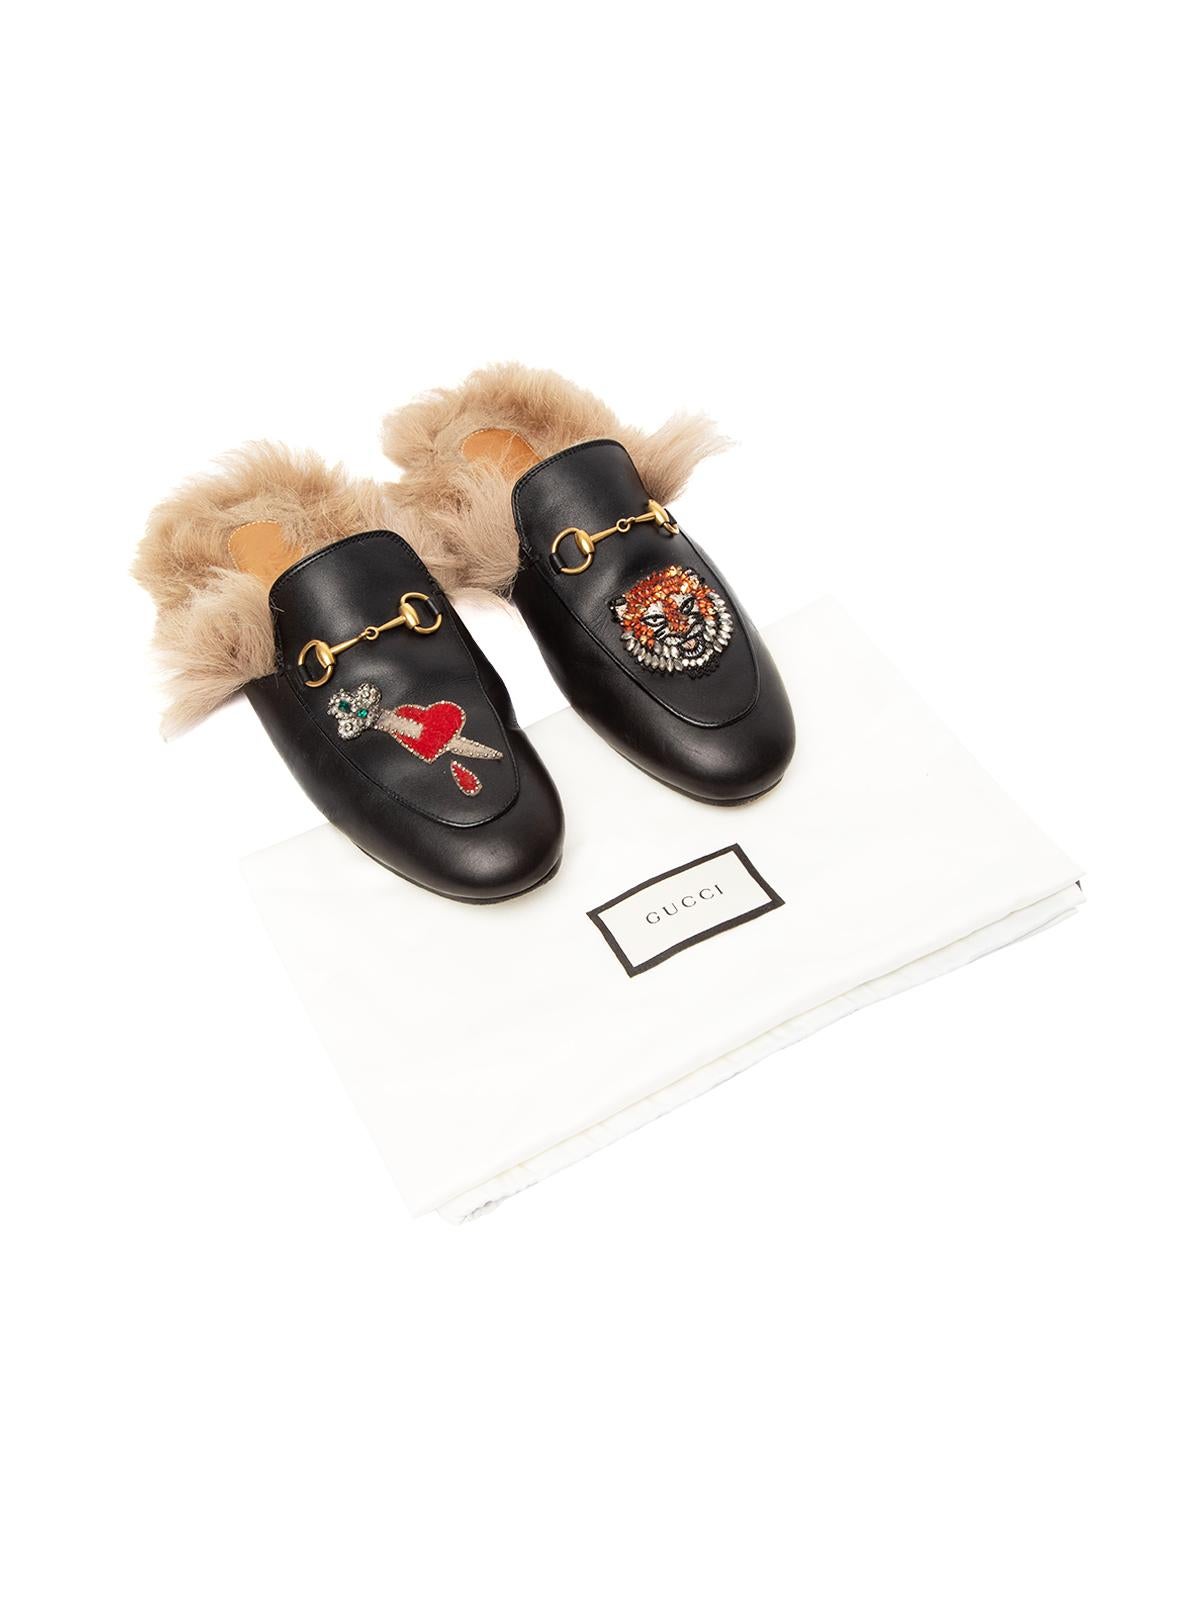 Pre-Loved Gucci Women's Fur Princetown Slippers 2